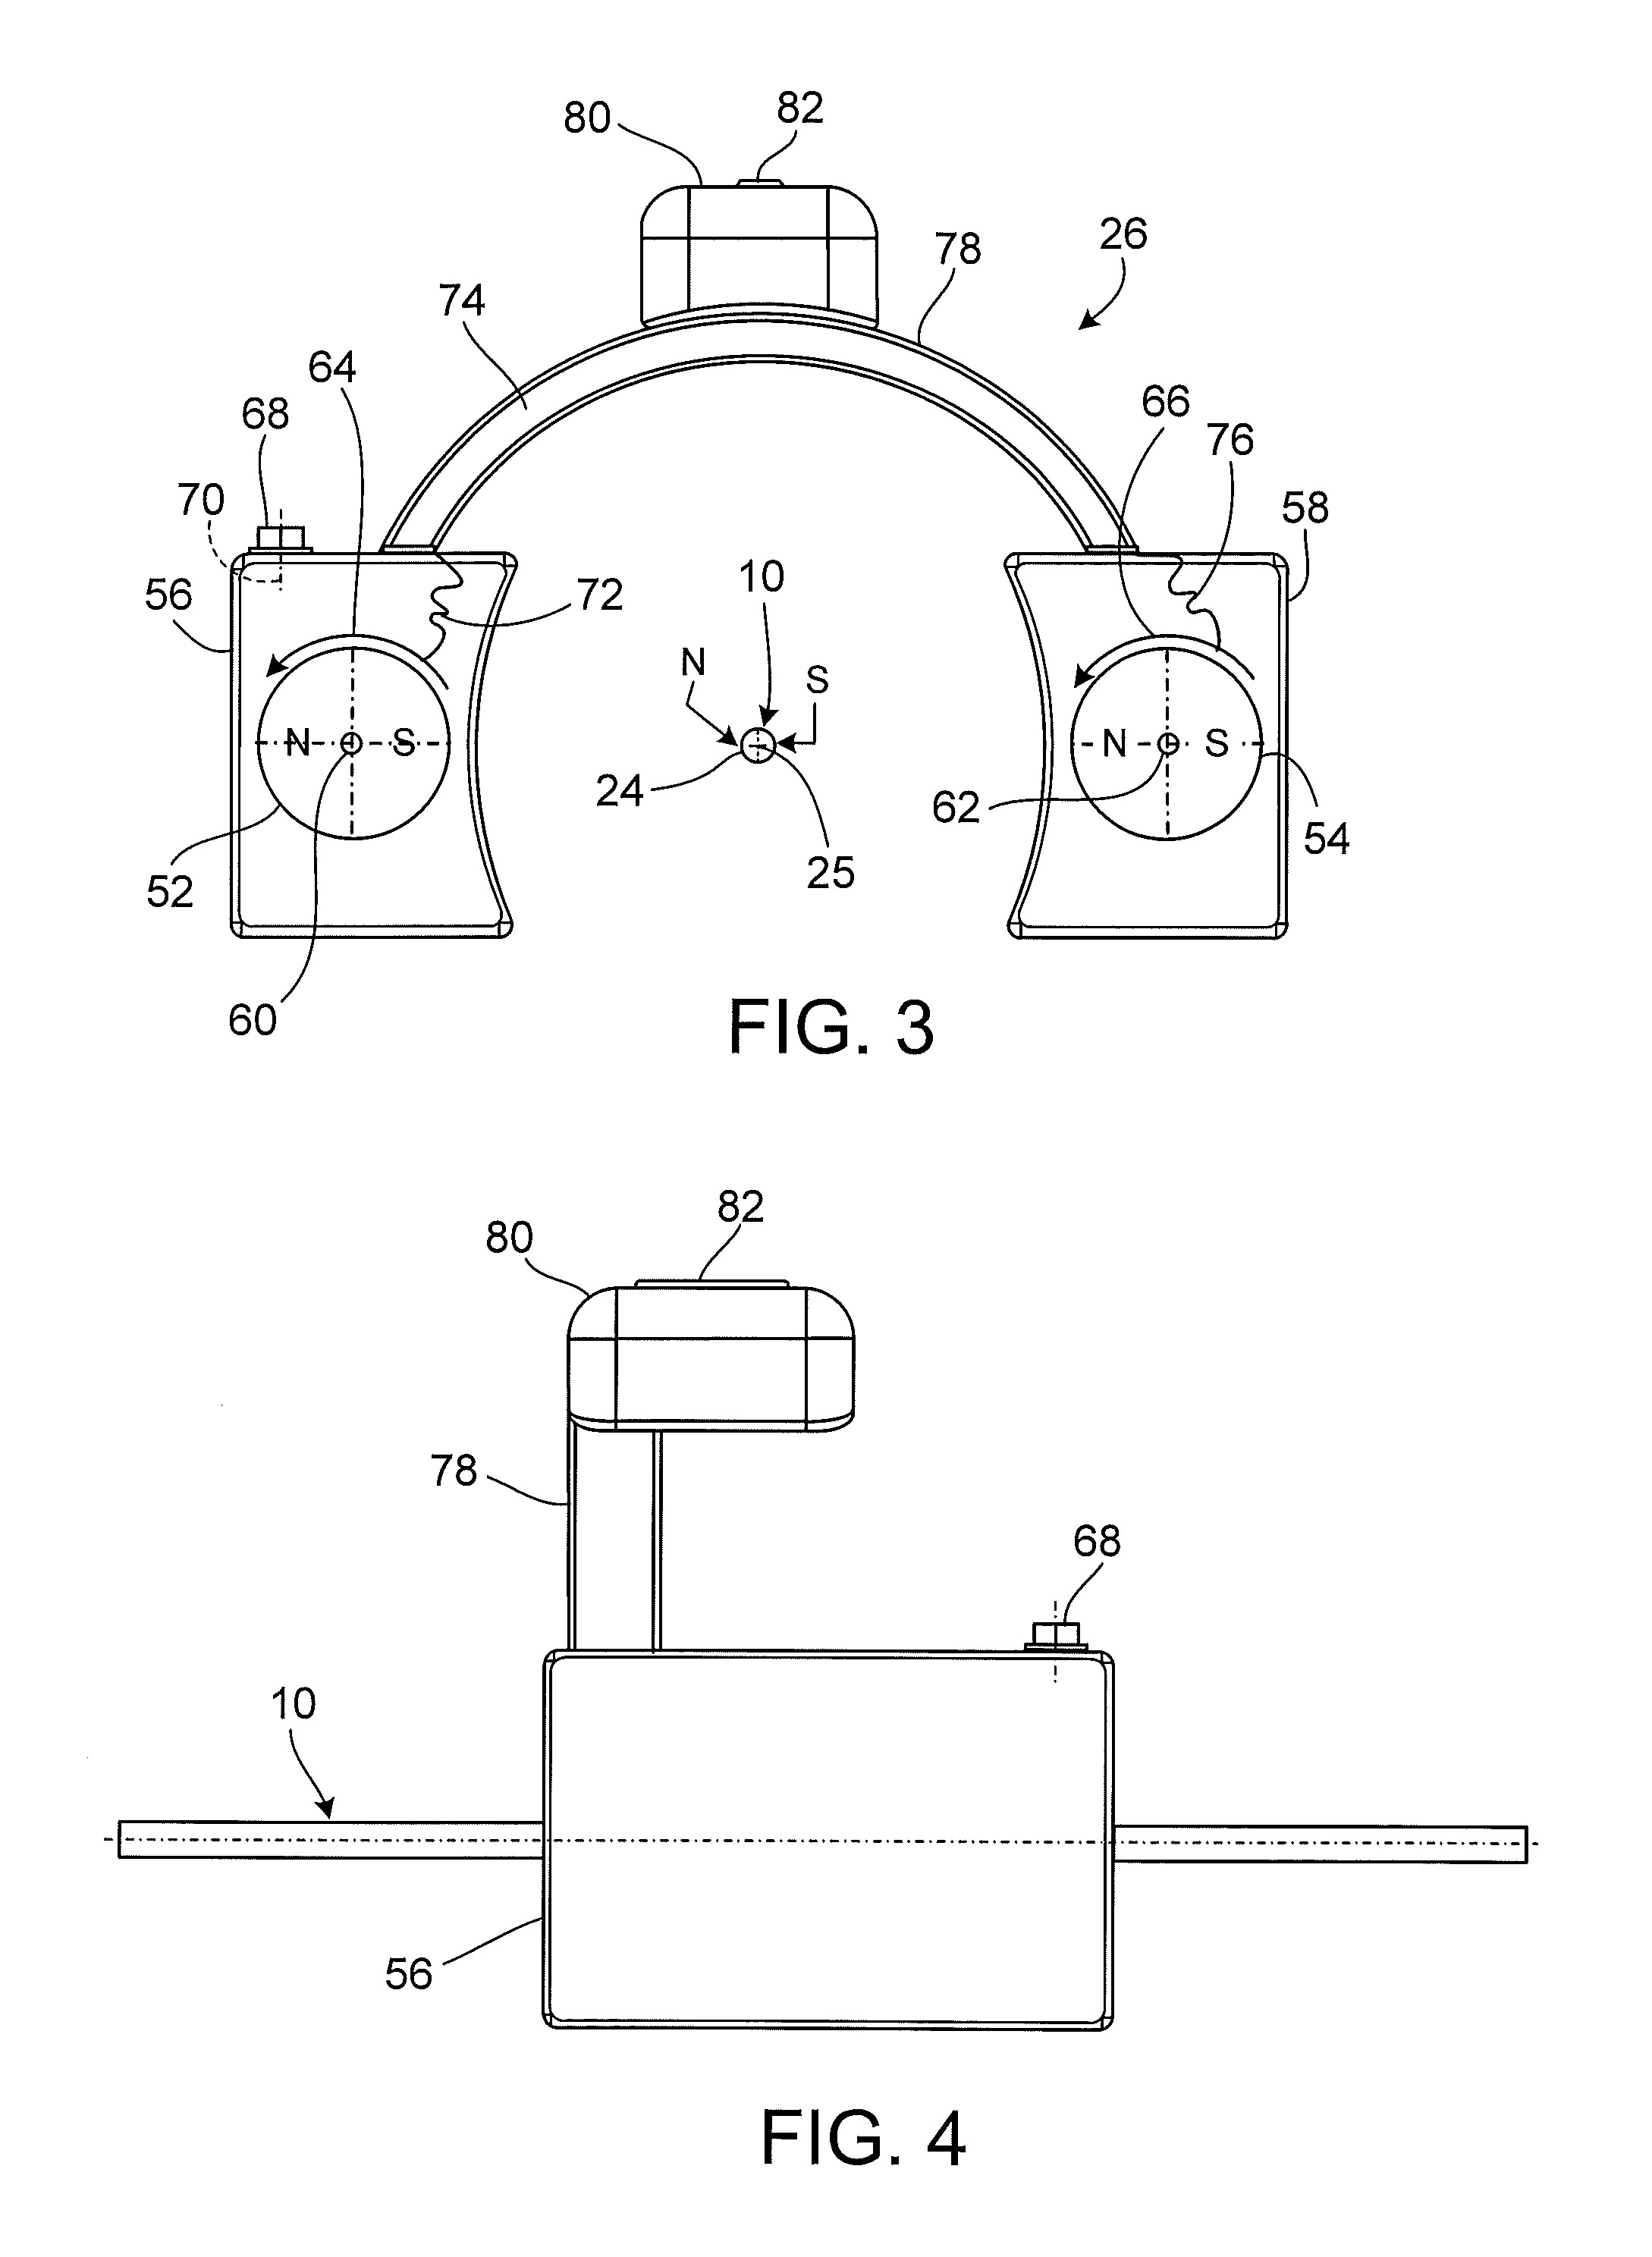 Telescoping IM nail and actuating mechanism